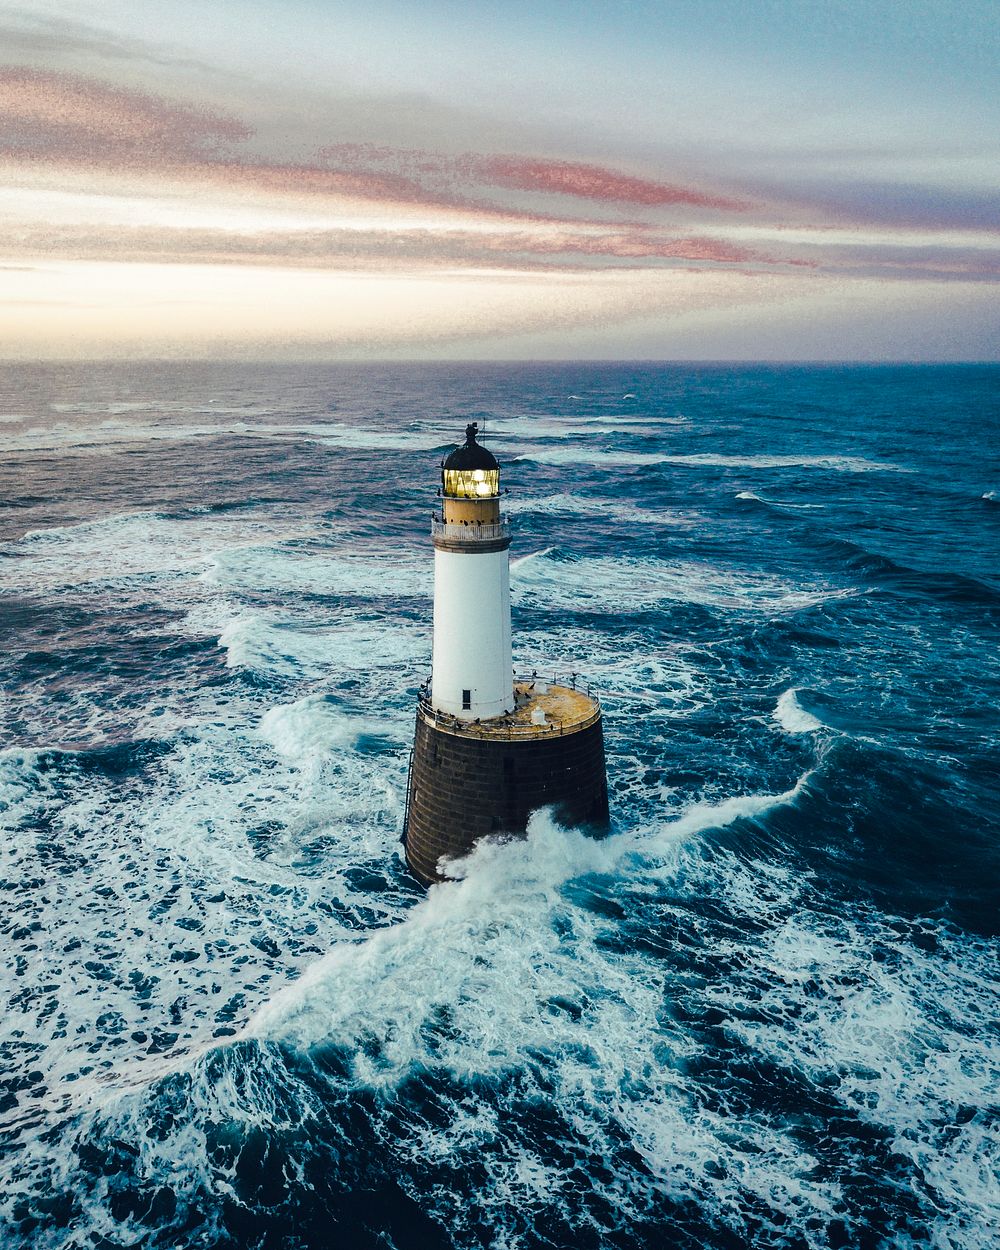 Waves hitting a lighthouse in Scotland